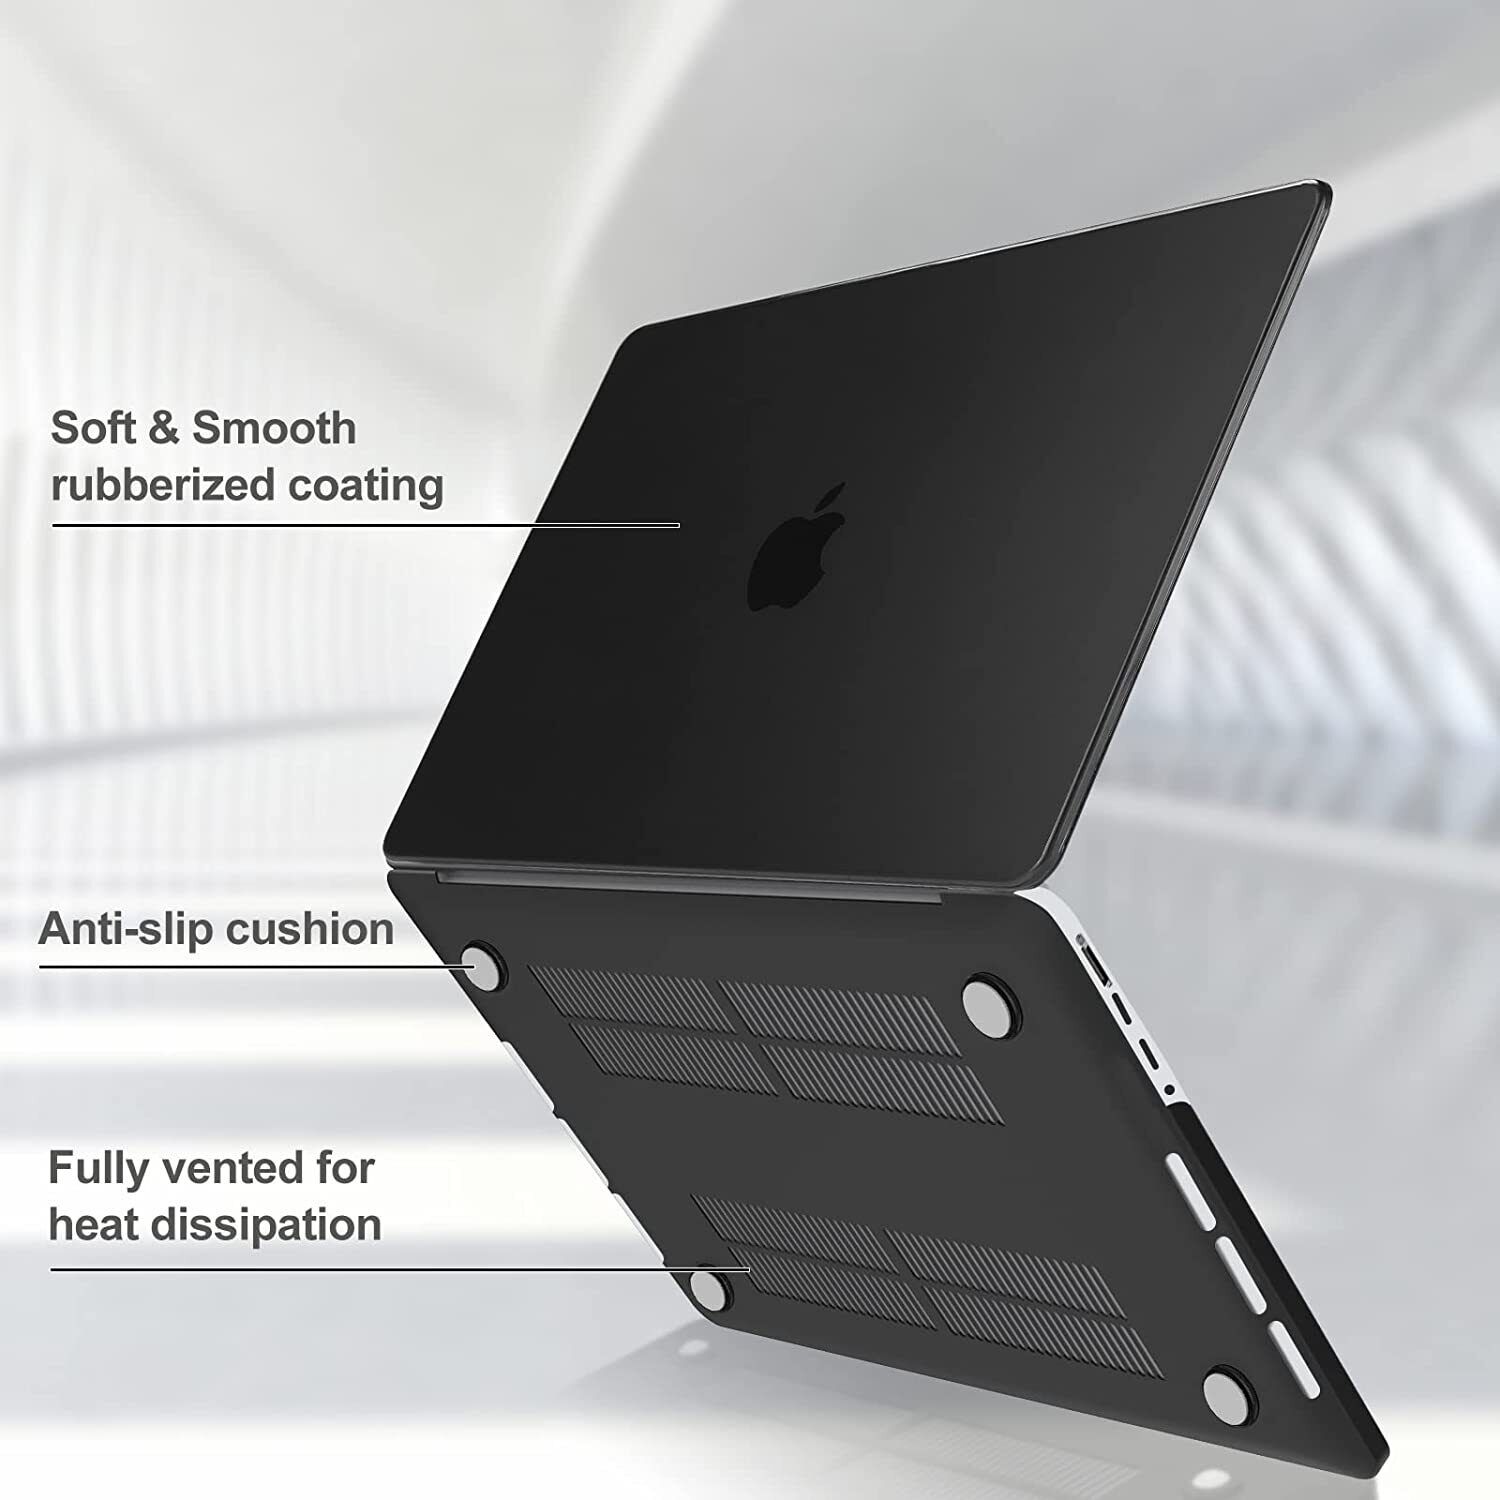 Crystal Clear Top/Bottom Case Cover for Macbook Pro 13 M1 Mac Air 13.6 M2 2022